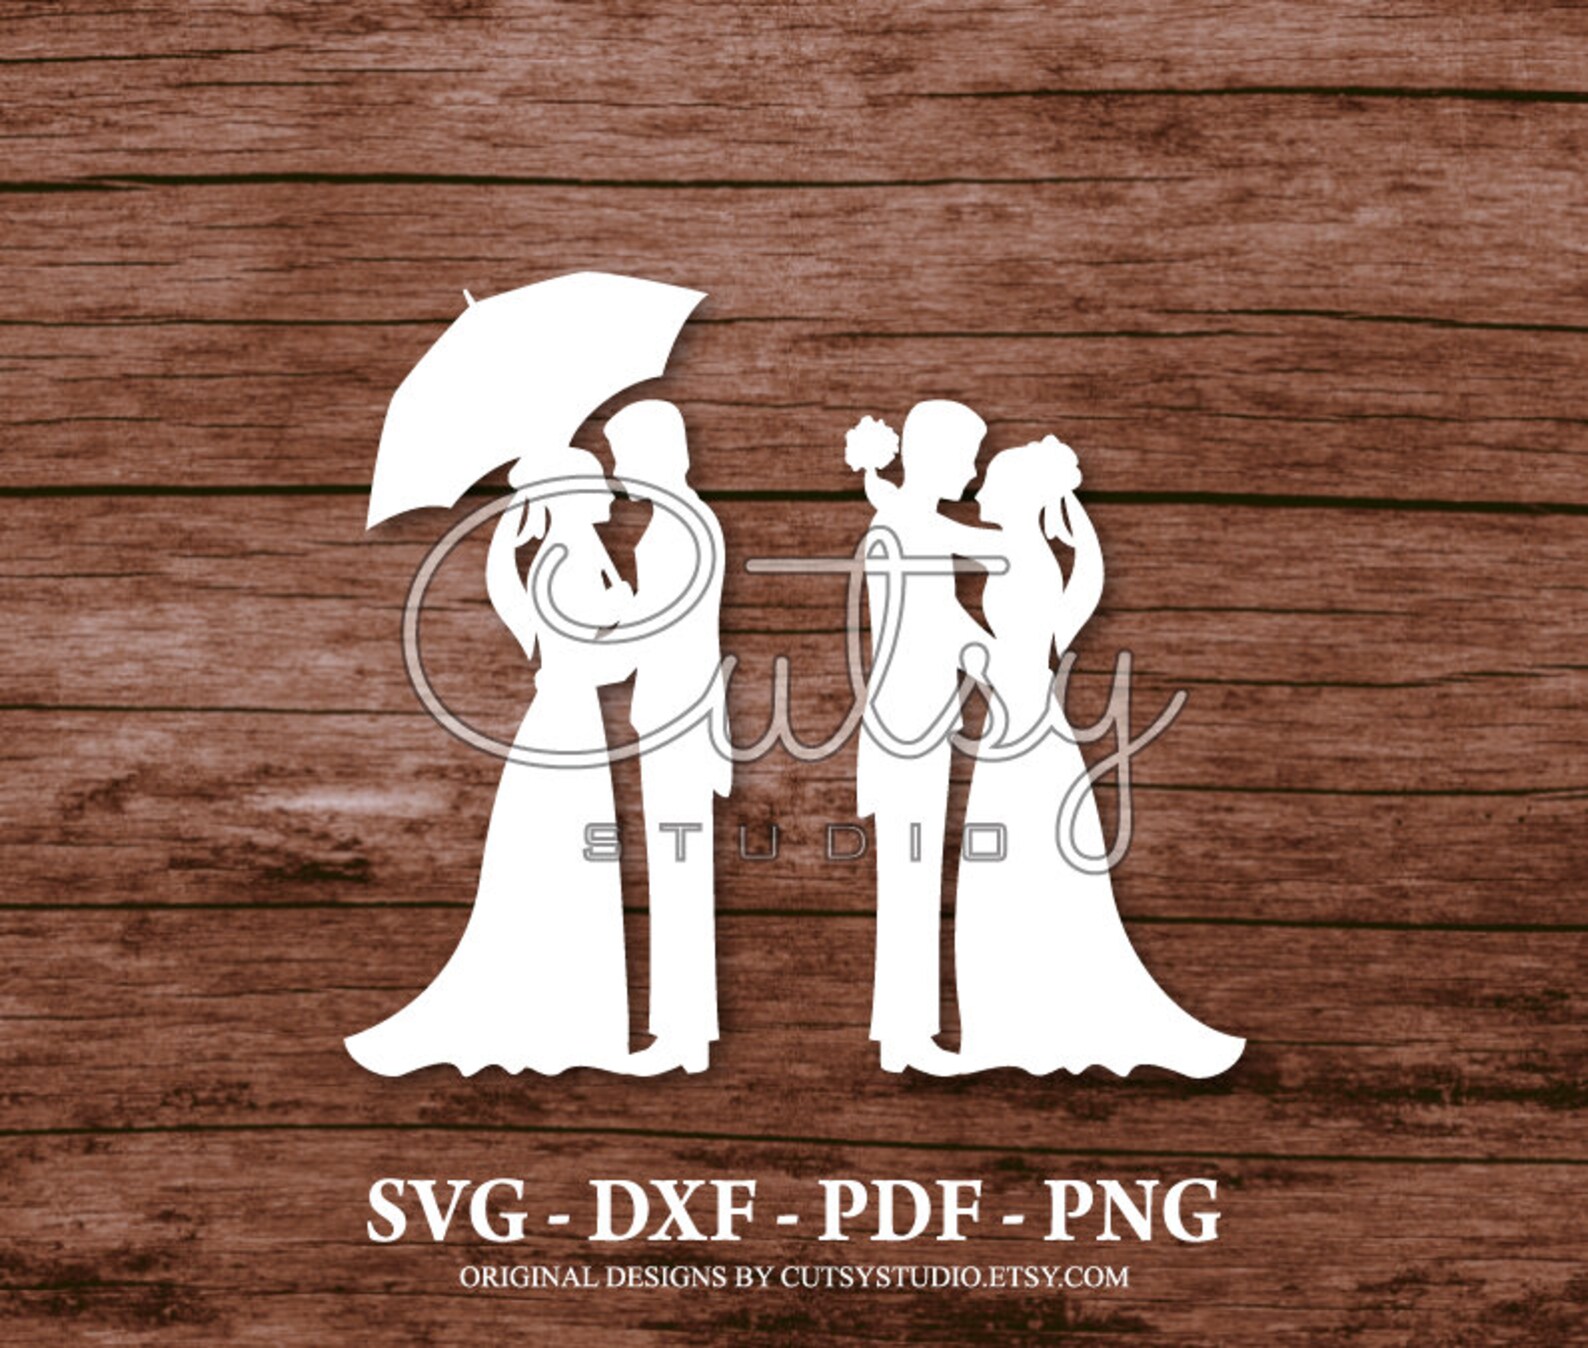 Download SVG Top Wedding Cake Ornaments Silhouette Cut Files ...